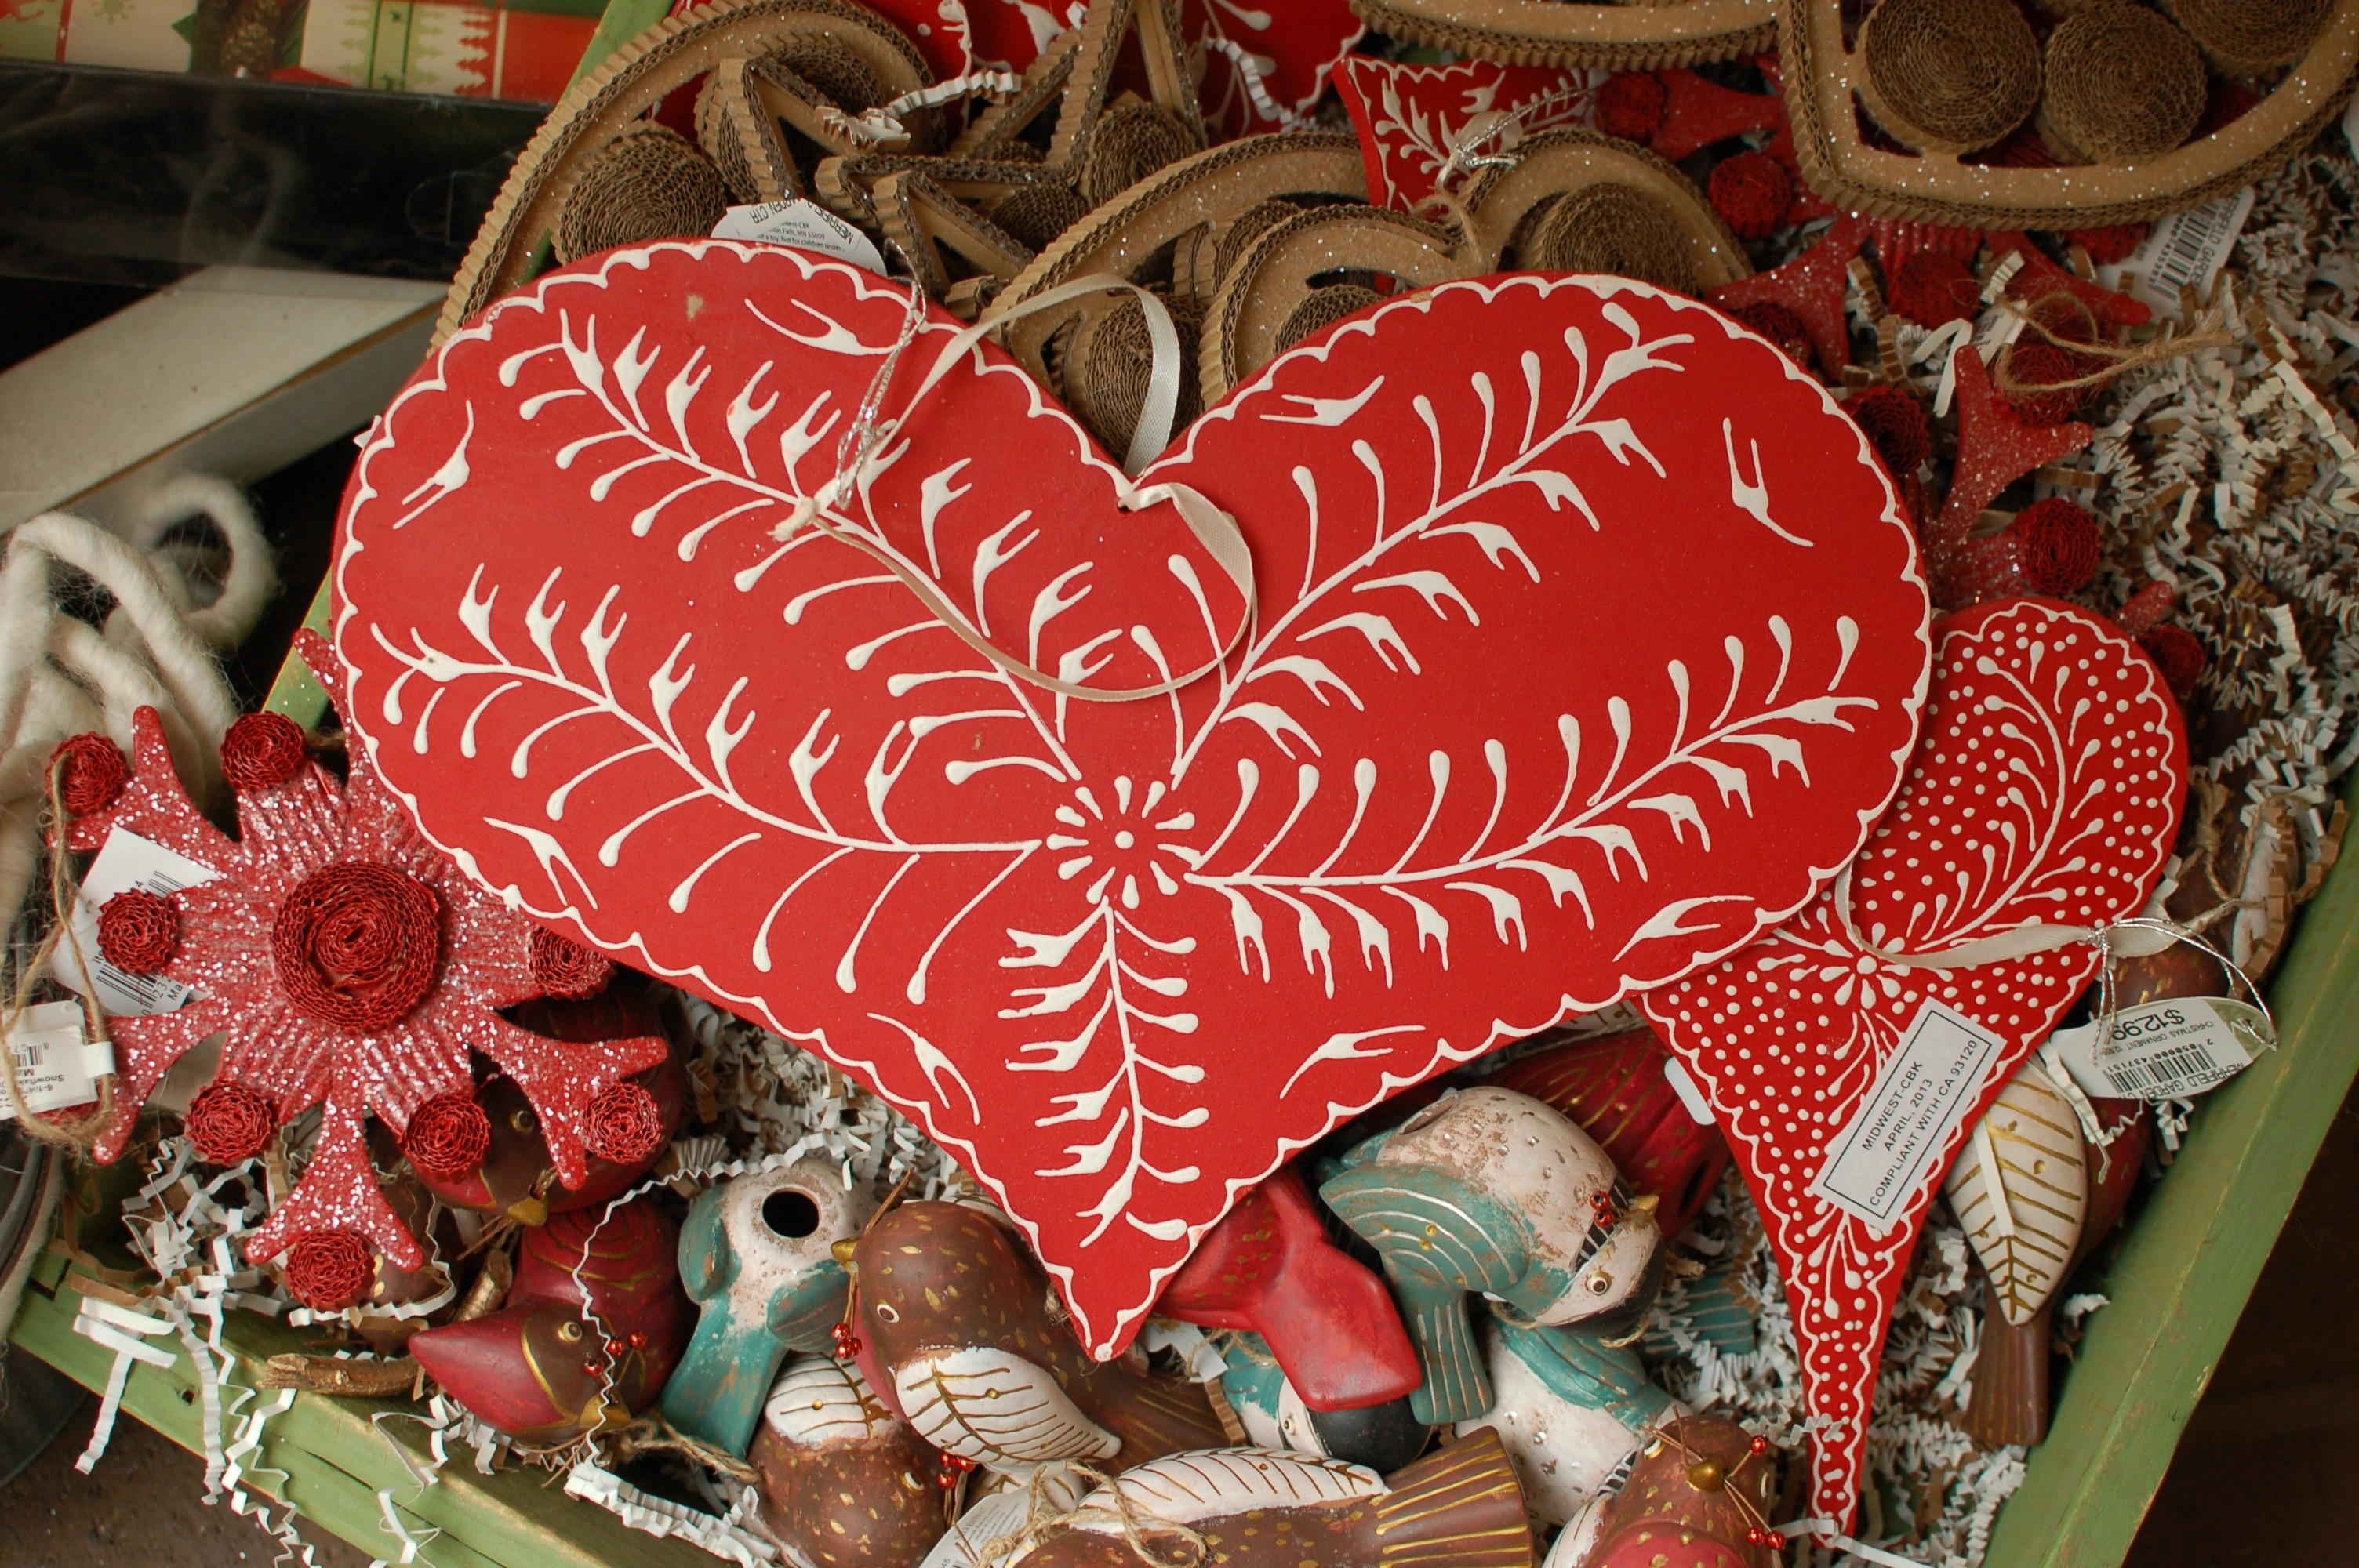 red and white heart shape decor